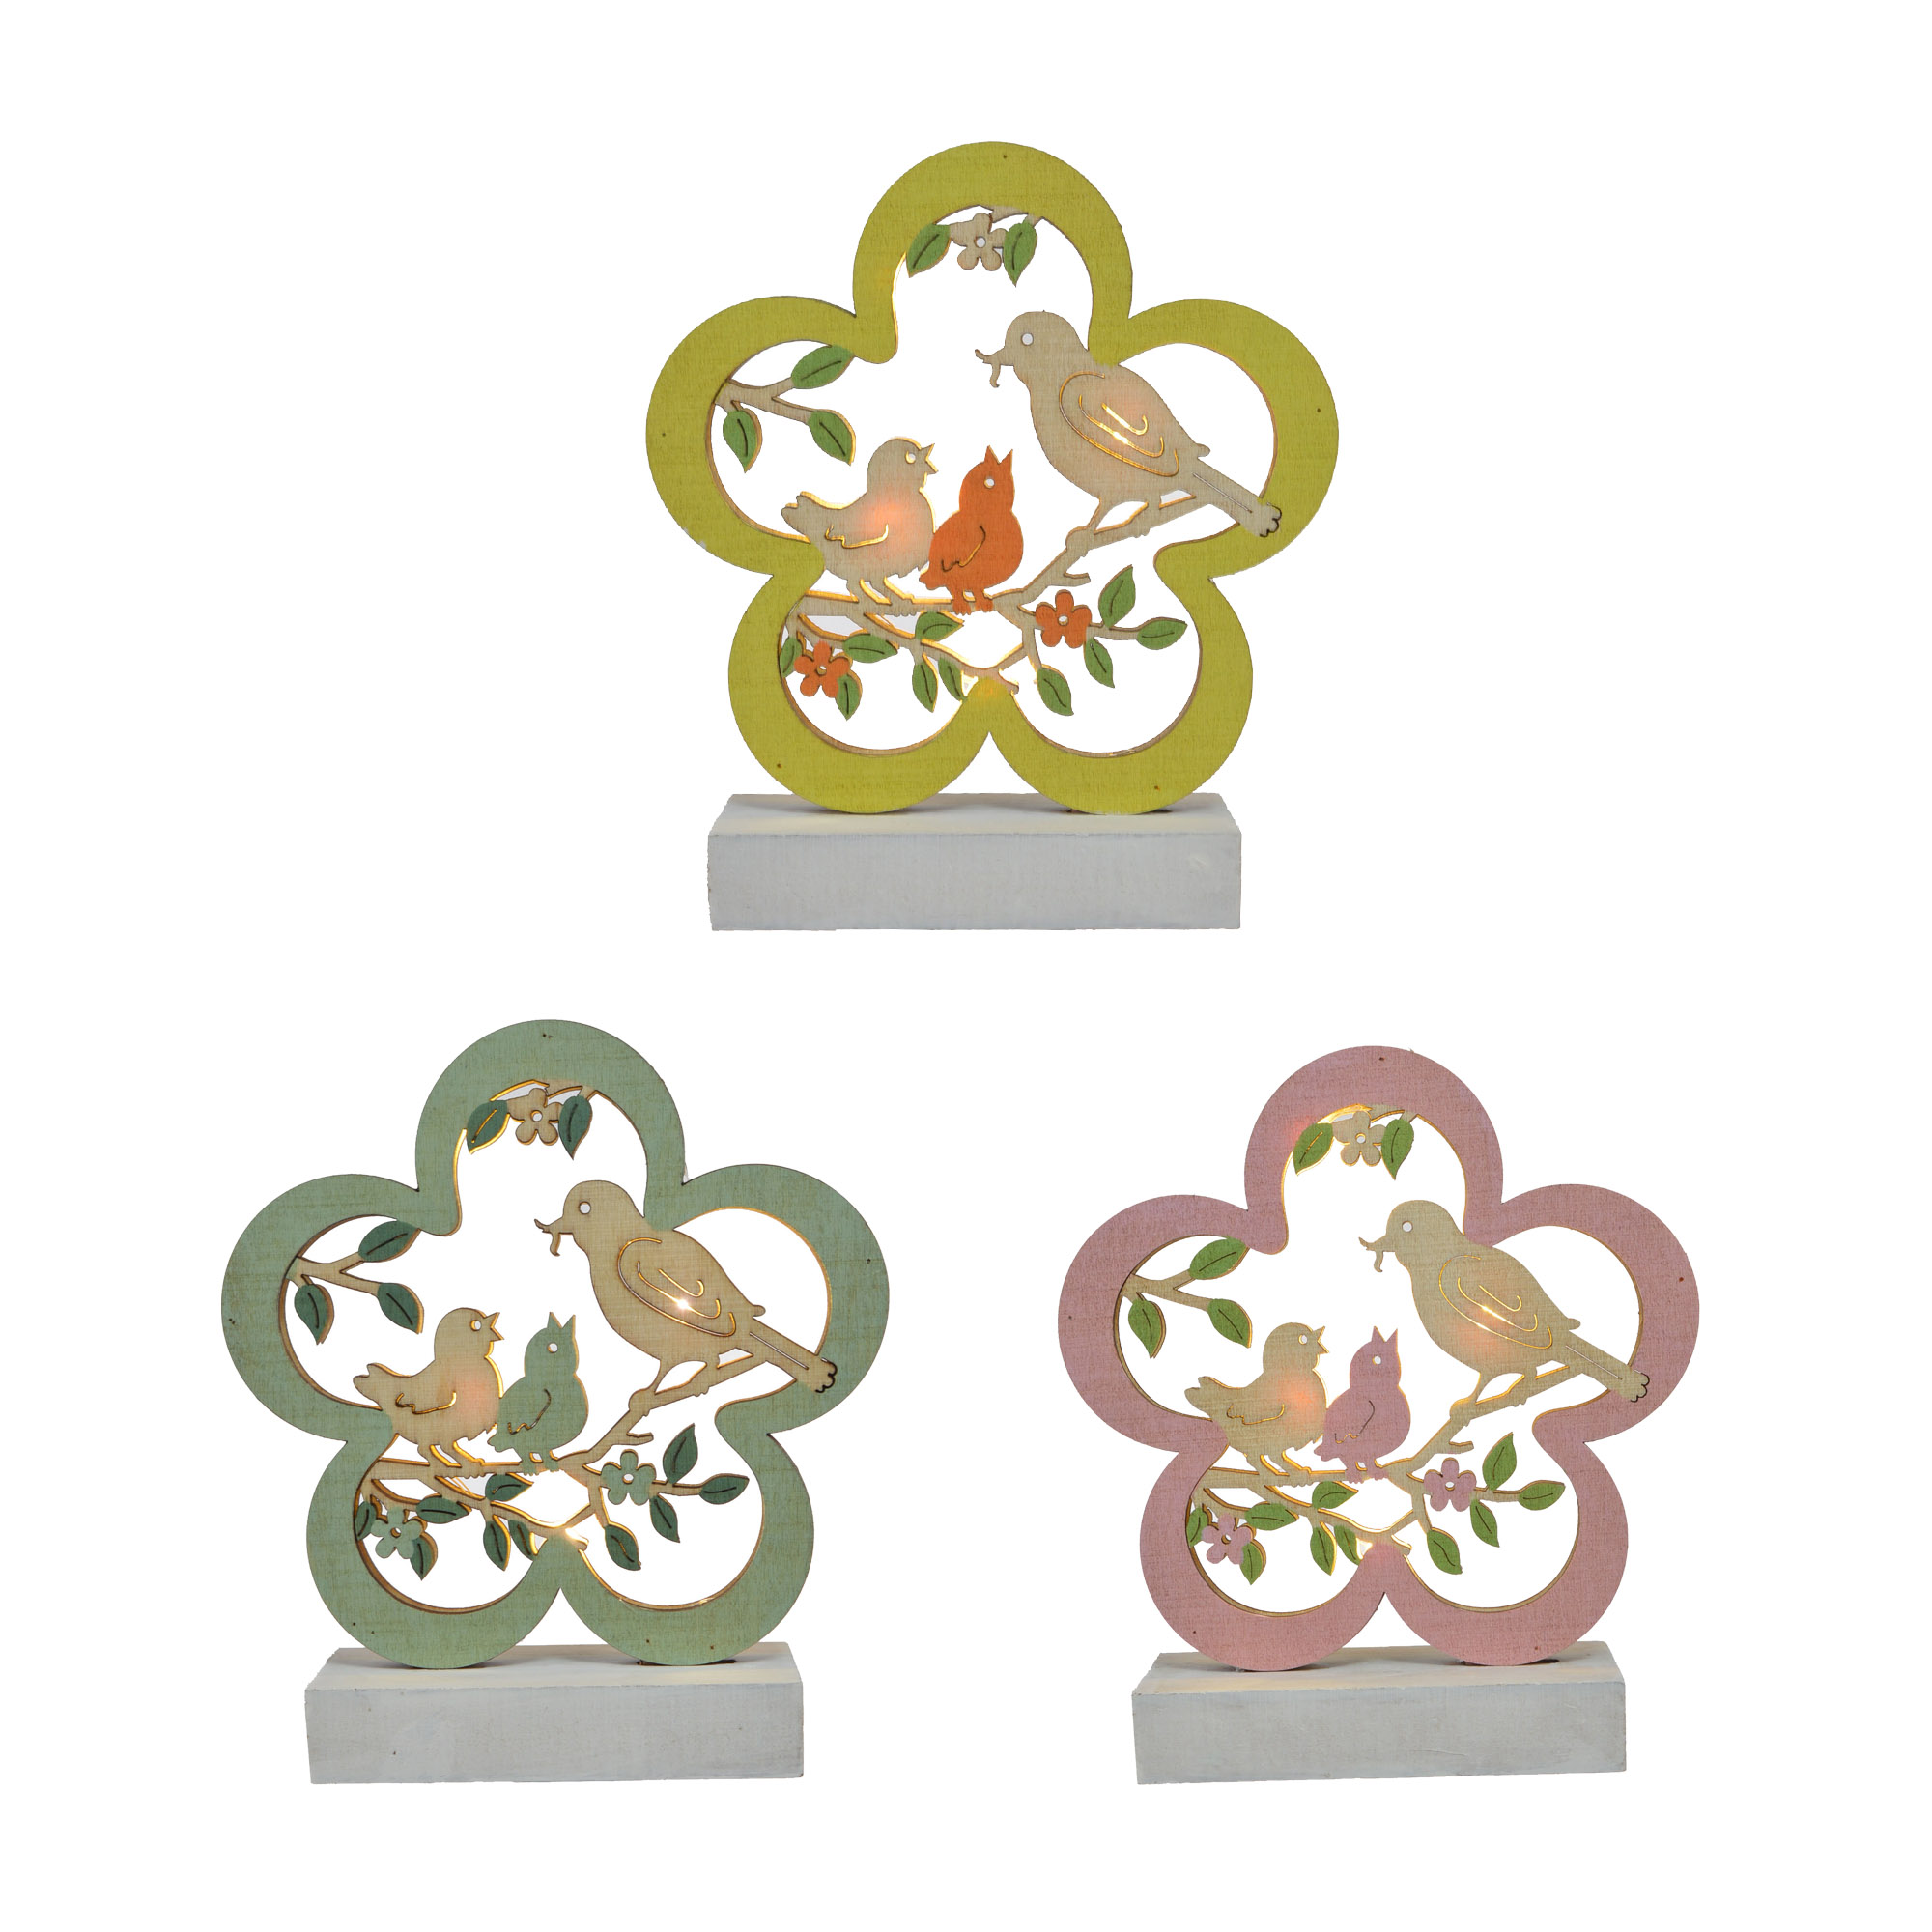 Easter Wood Ornaments Flower Shape With Birds and Branches For Easter Party Decorations